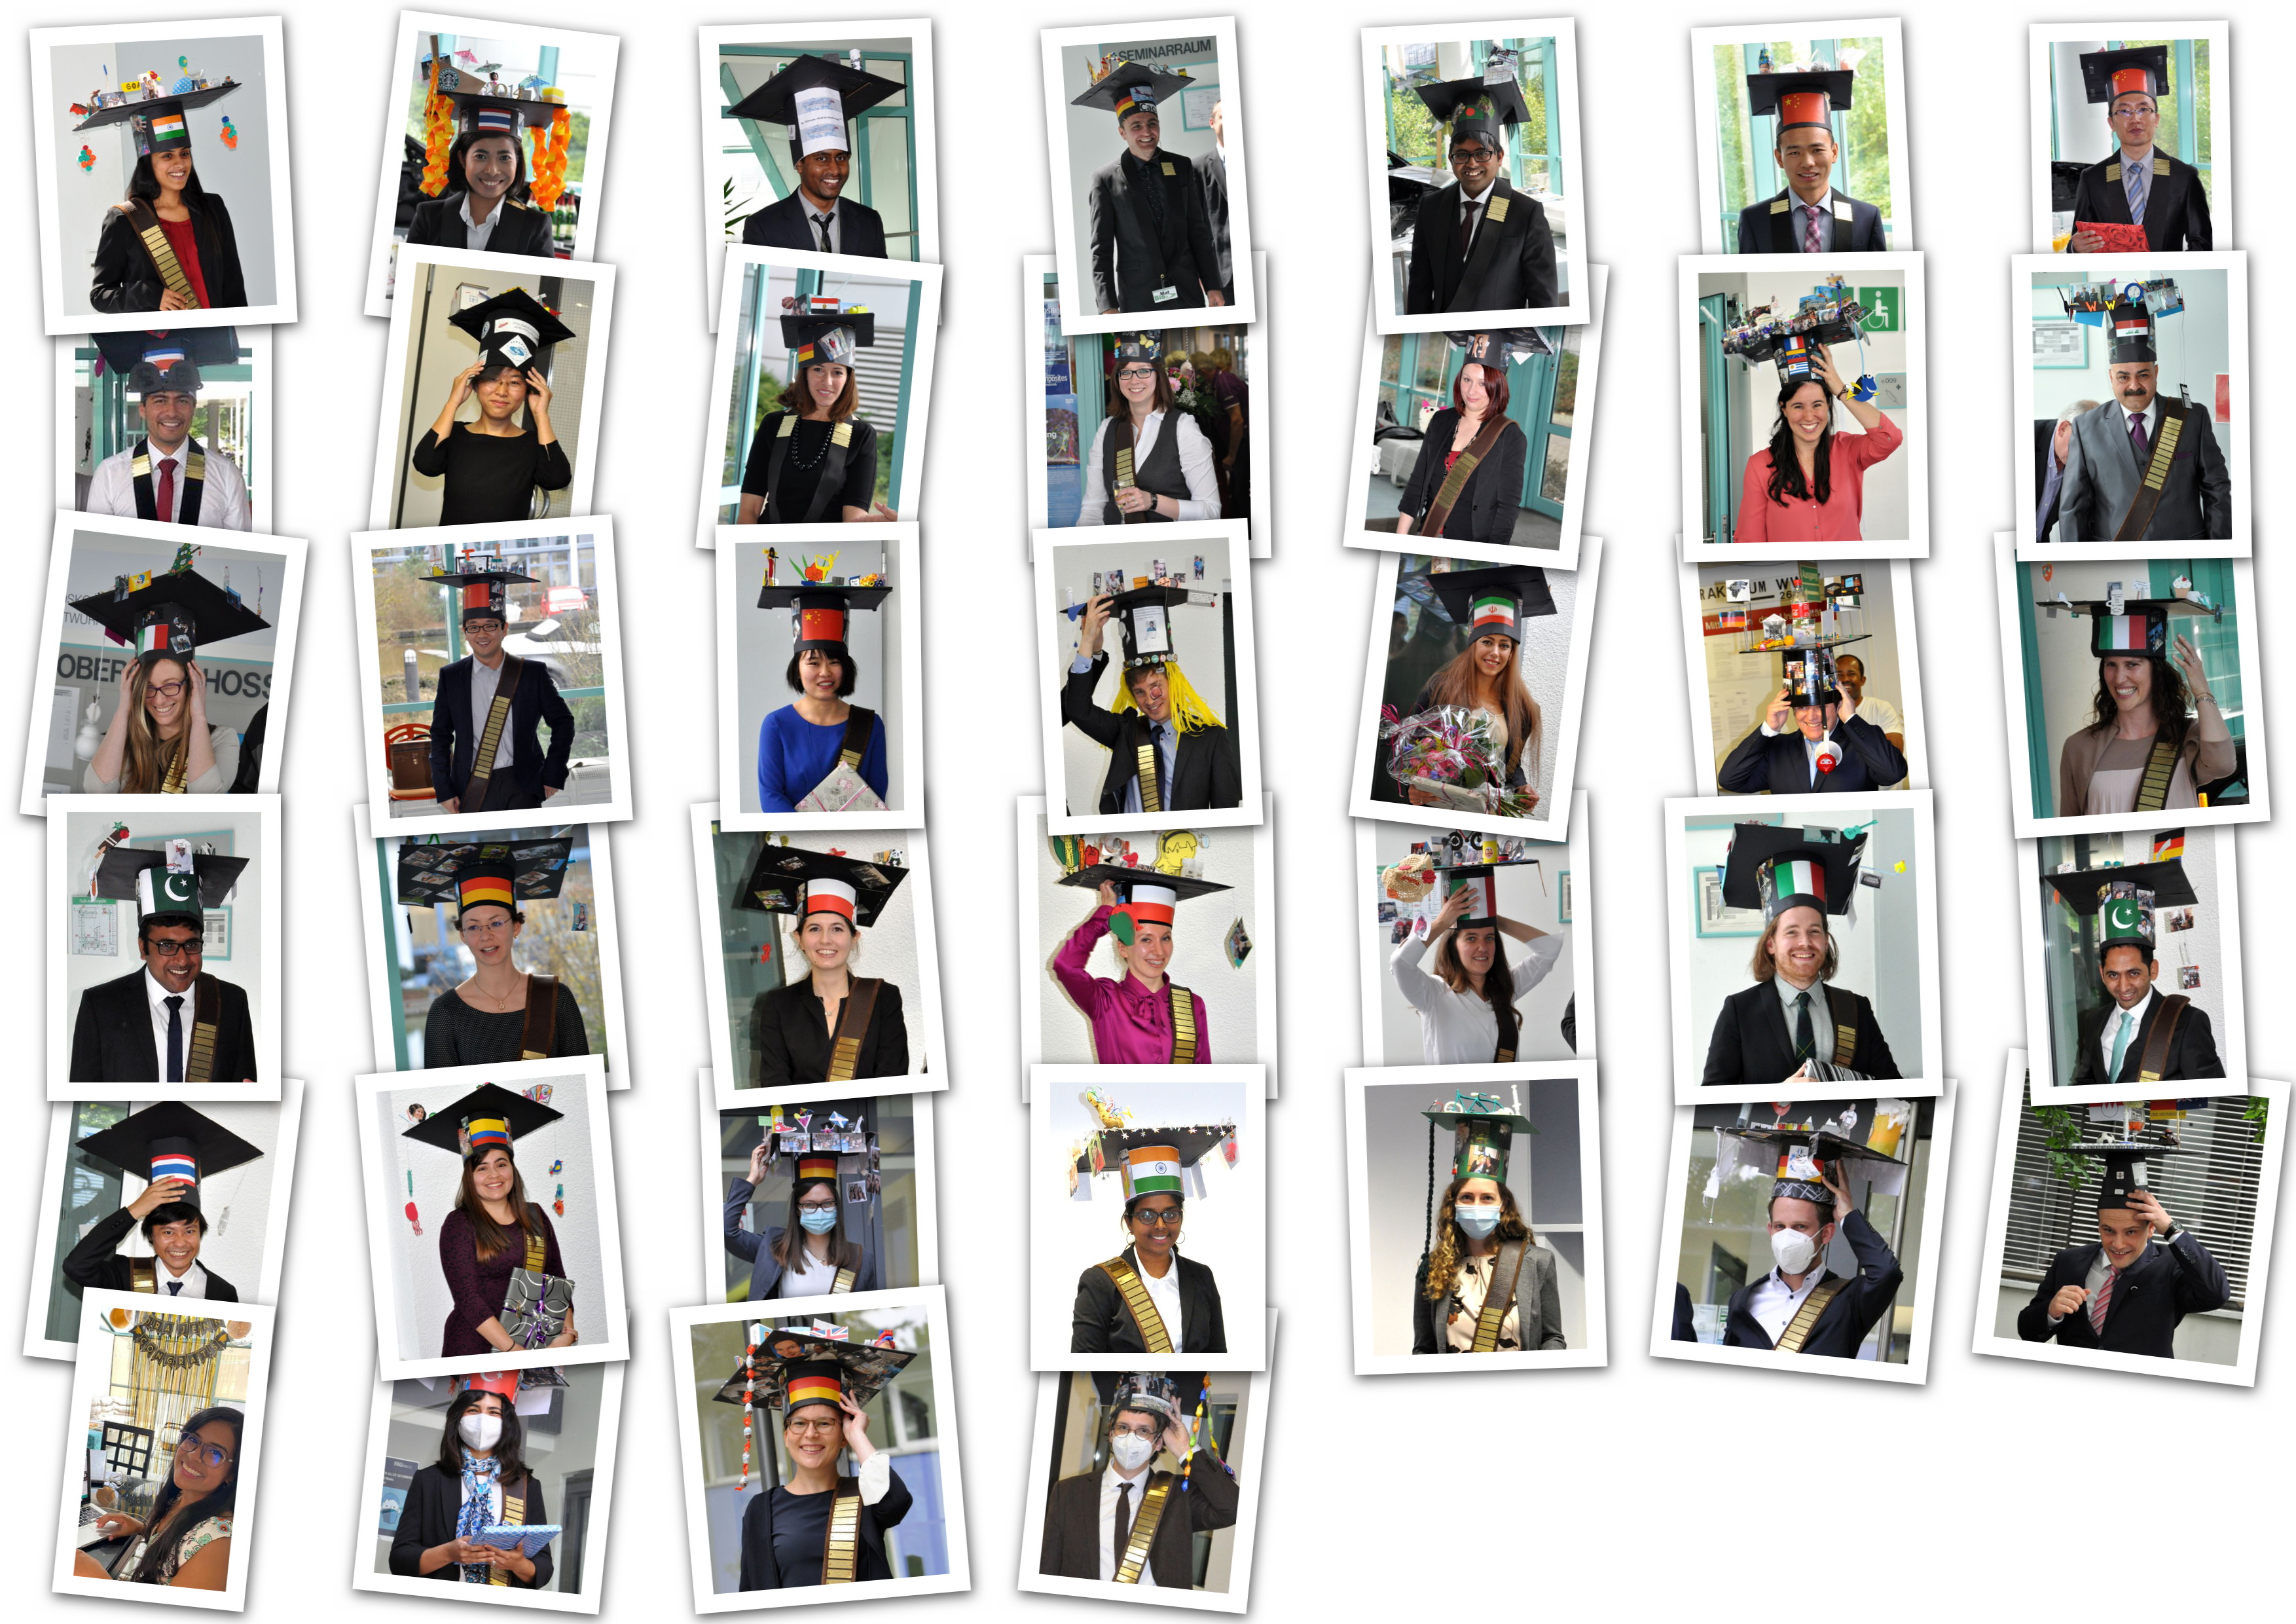 all successful PhD candidates with their doctor hats as collage